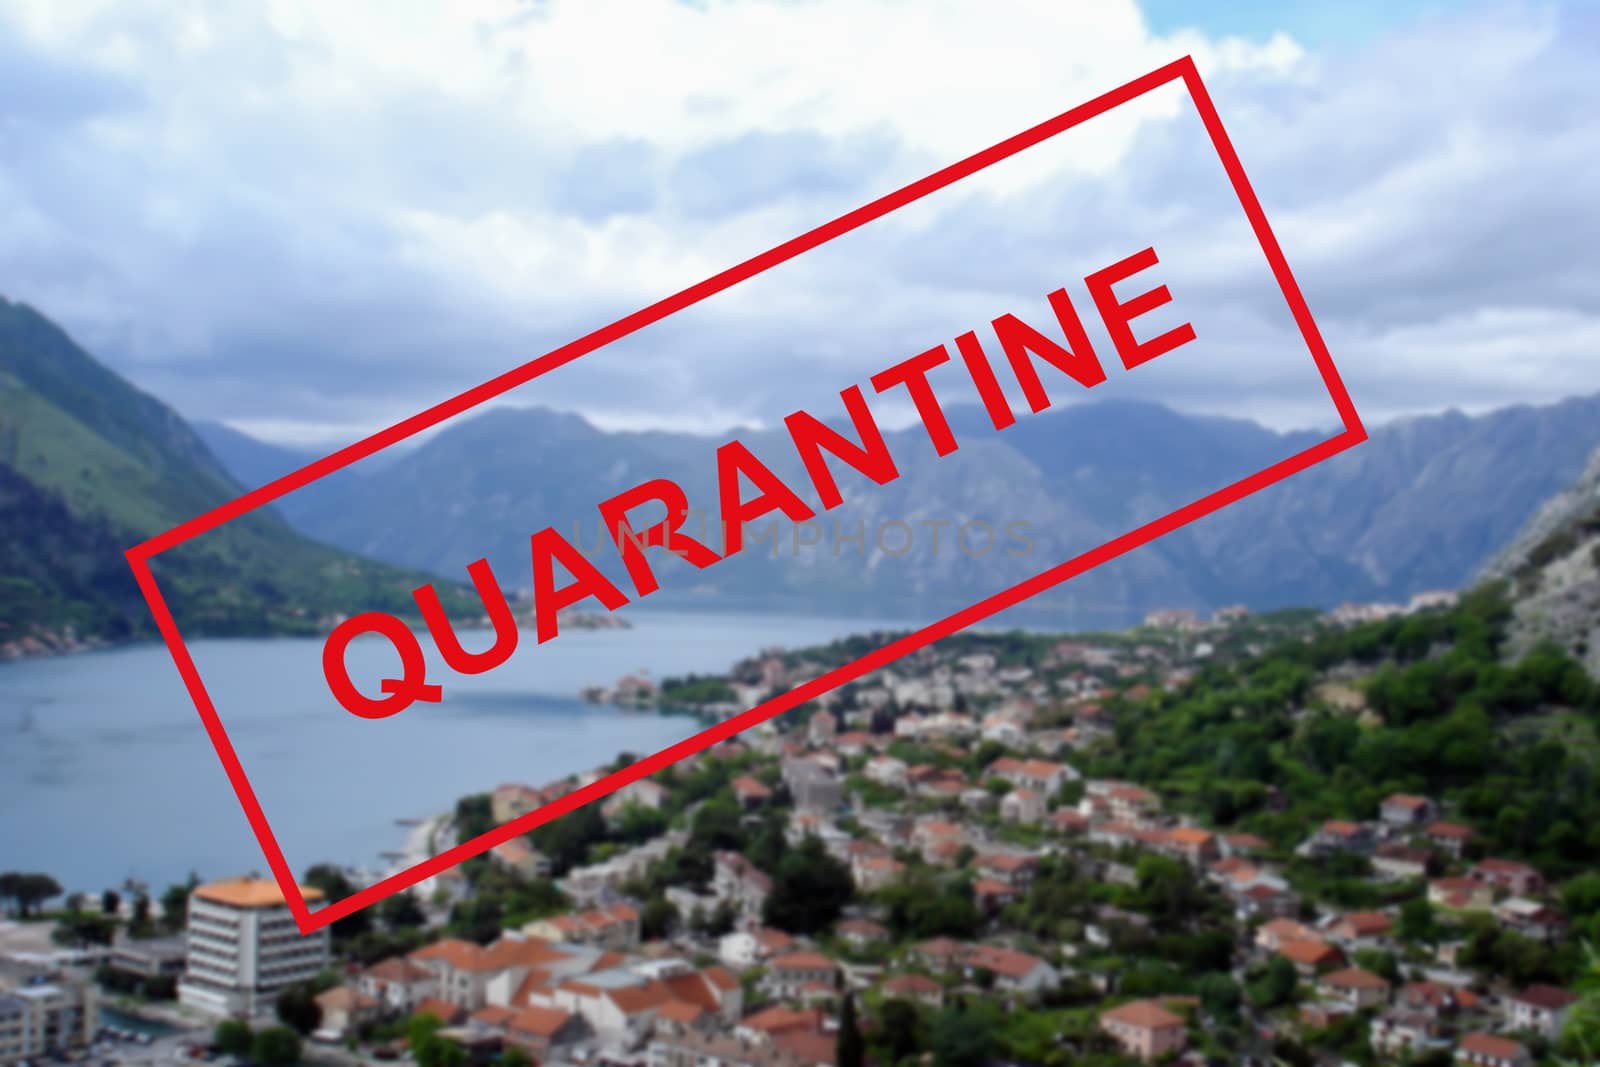 Text Quarantine on the background of the Mediterranean coast in Montenegro . by bonilook